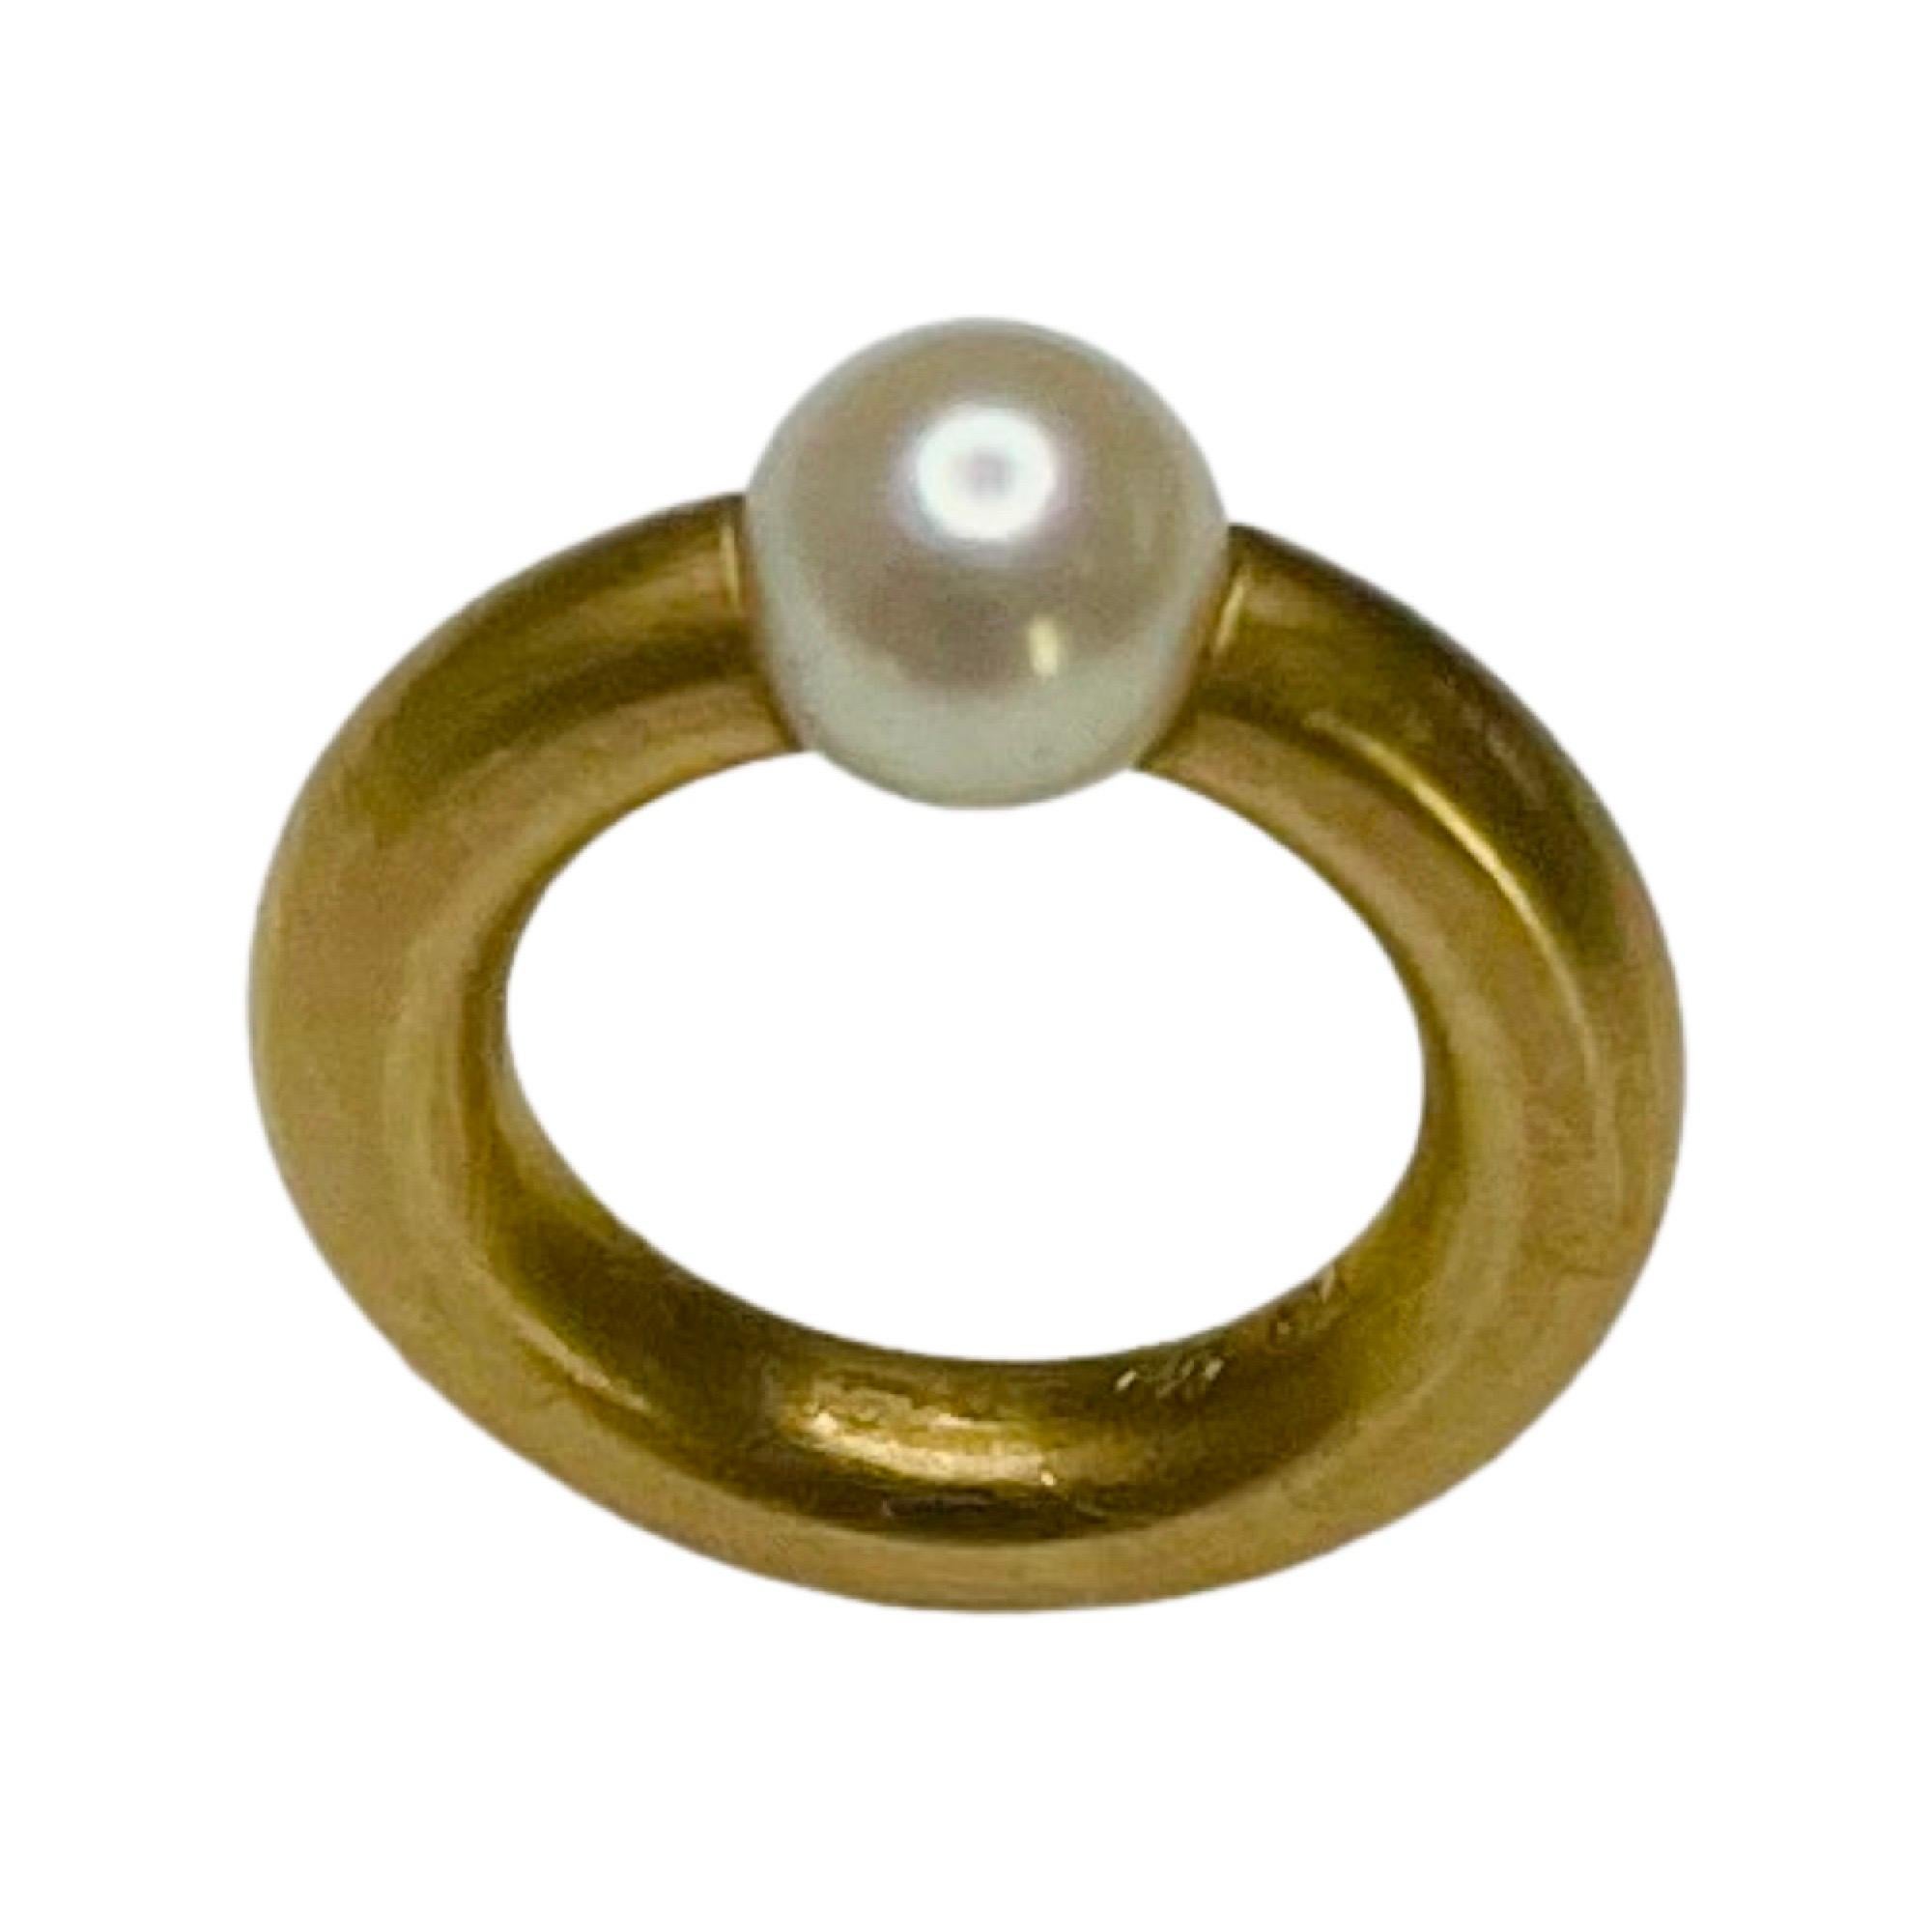 Gellner 18K Yellow Gold Baby Akoya Pearl Ring. This a ring for a baby usually worn on as a necklace.  It is a symbolic and traditional baby gift.  This is more of a charm than a ring. The inside diameter is 9.3 mm and the outside diameter is 13.3